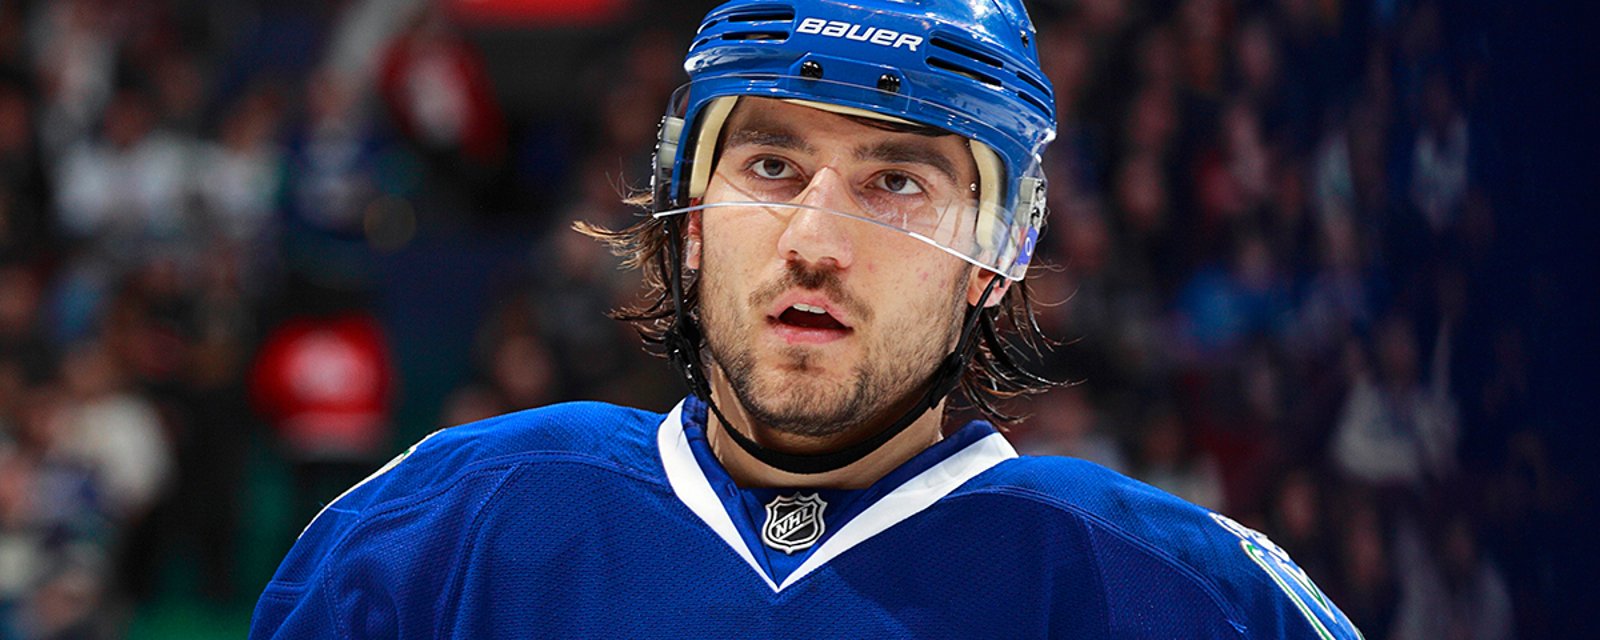 Injury Report: Finally some good news for Tanev